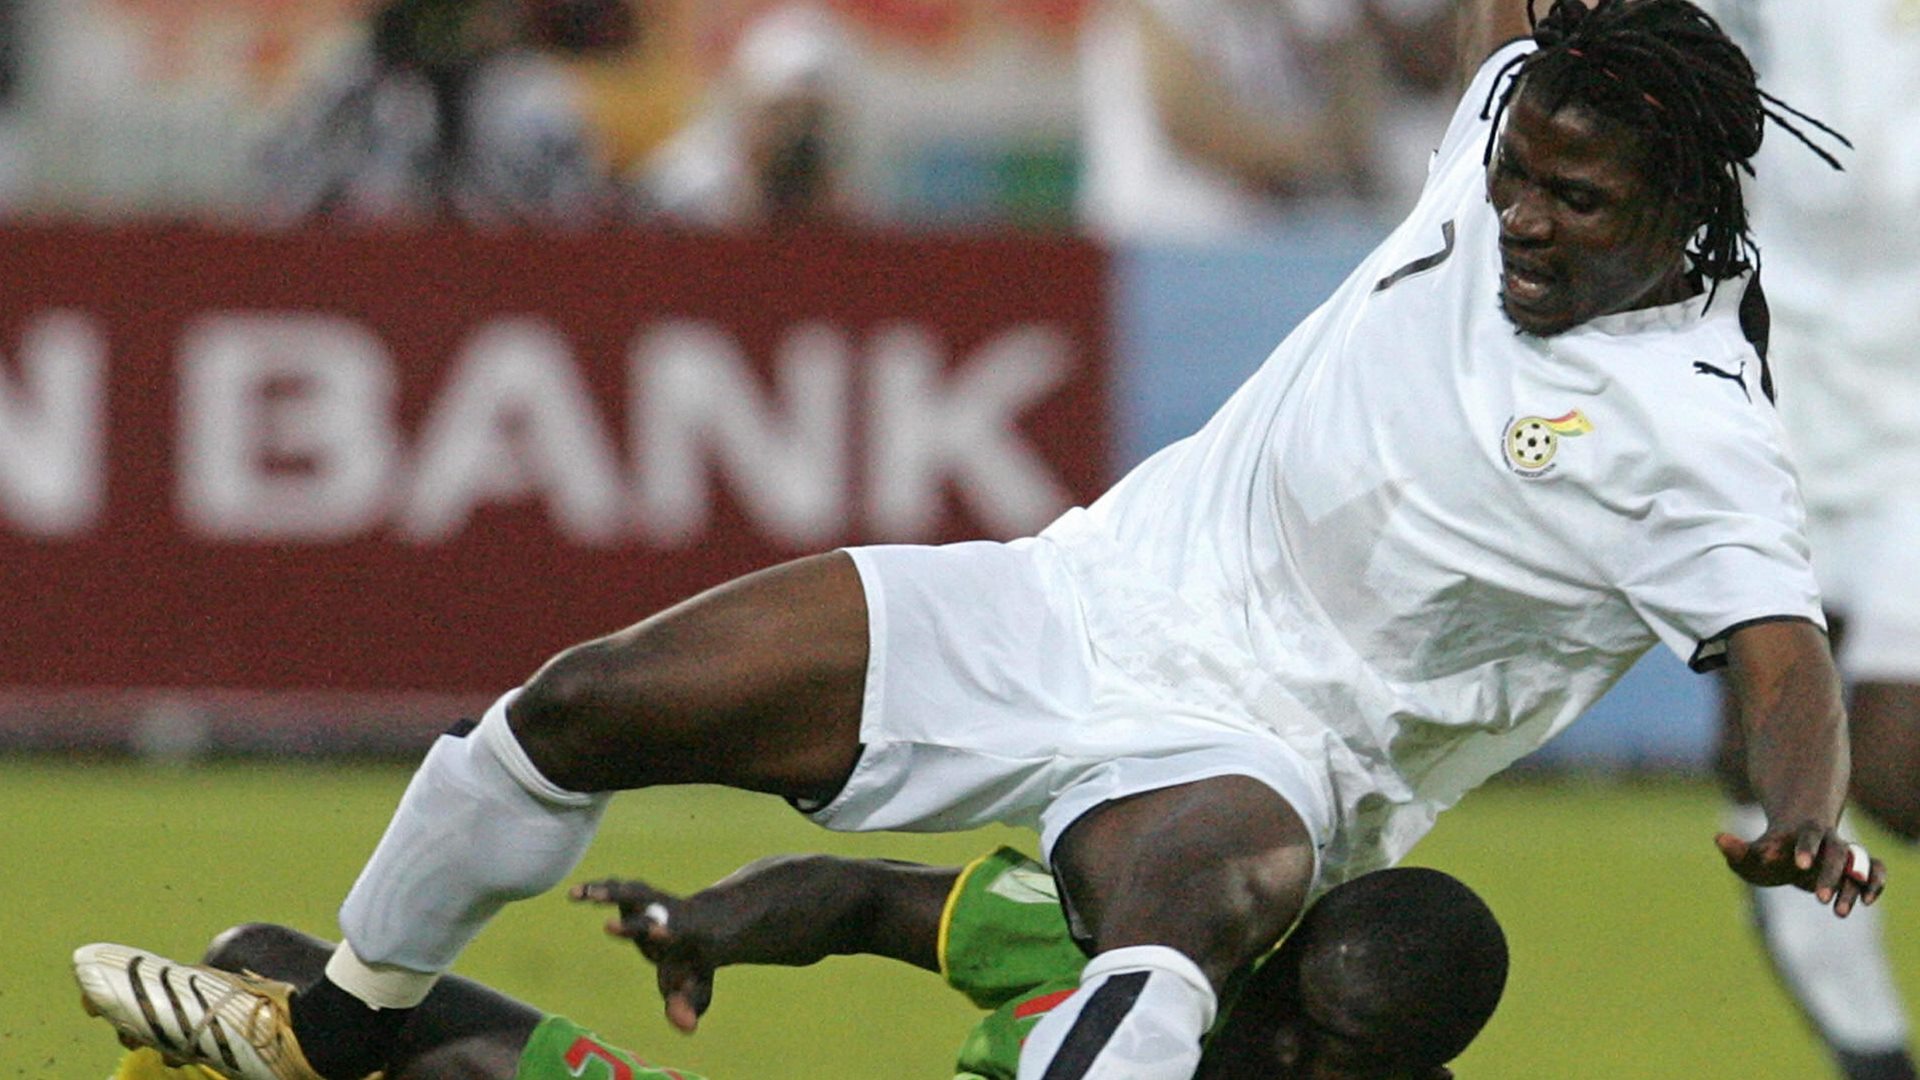 Former Ghana star Laryea won’t hold Serbian coach Dujkovic responsible for World Cup woes